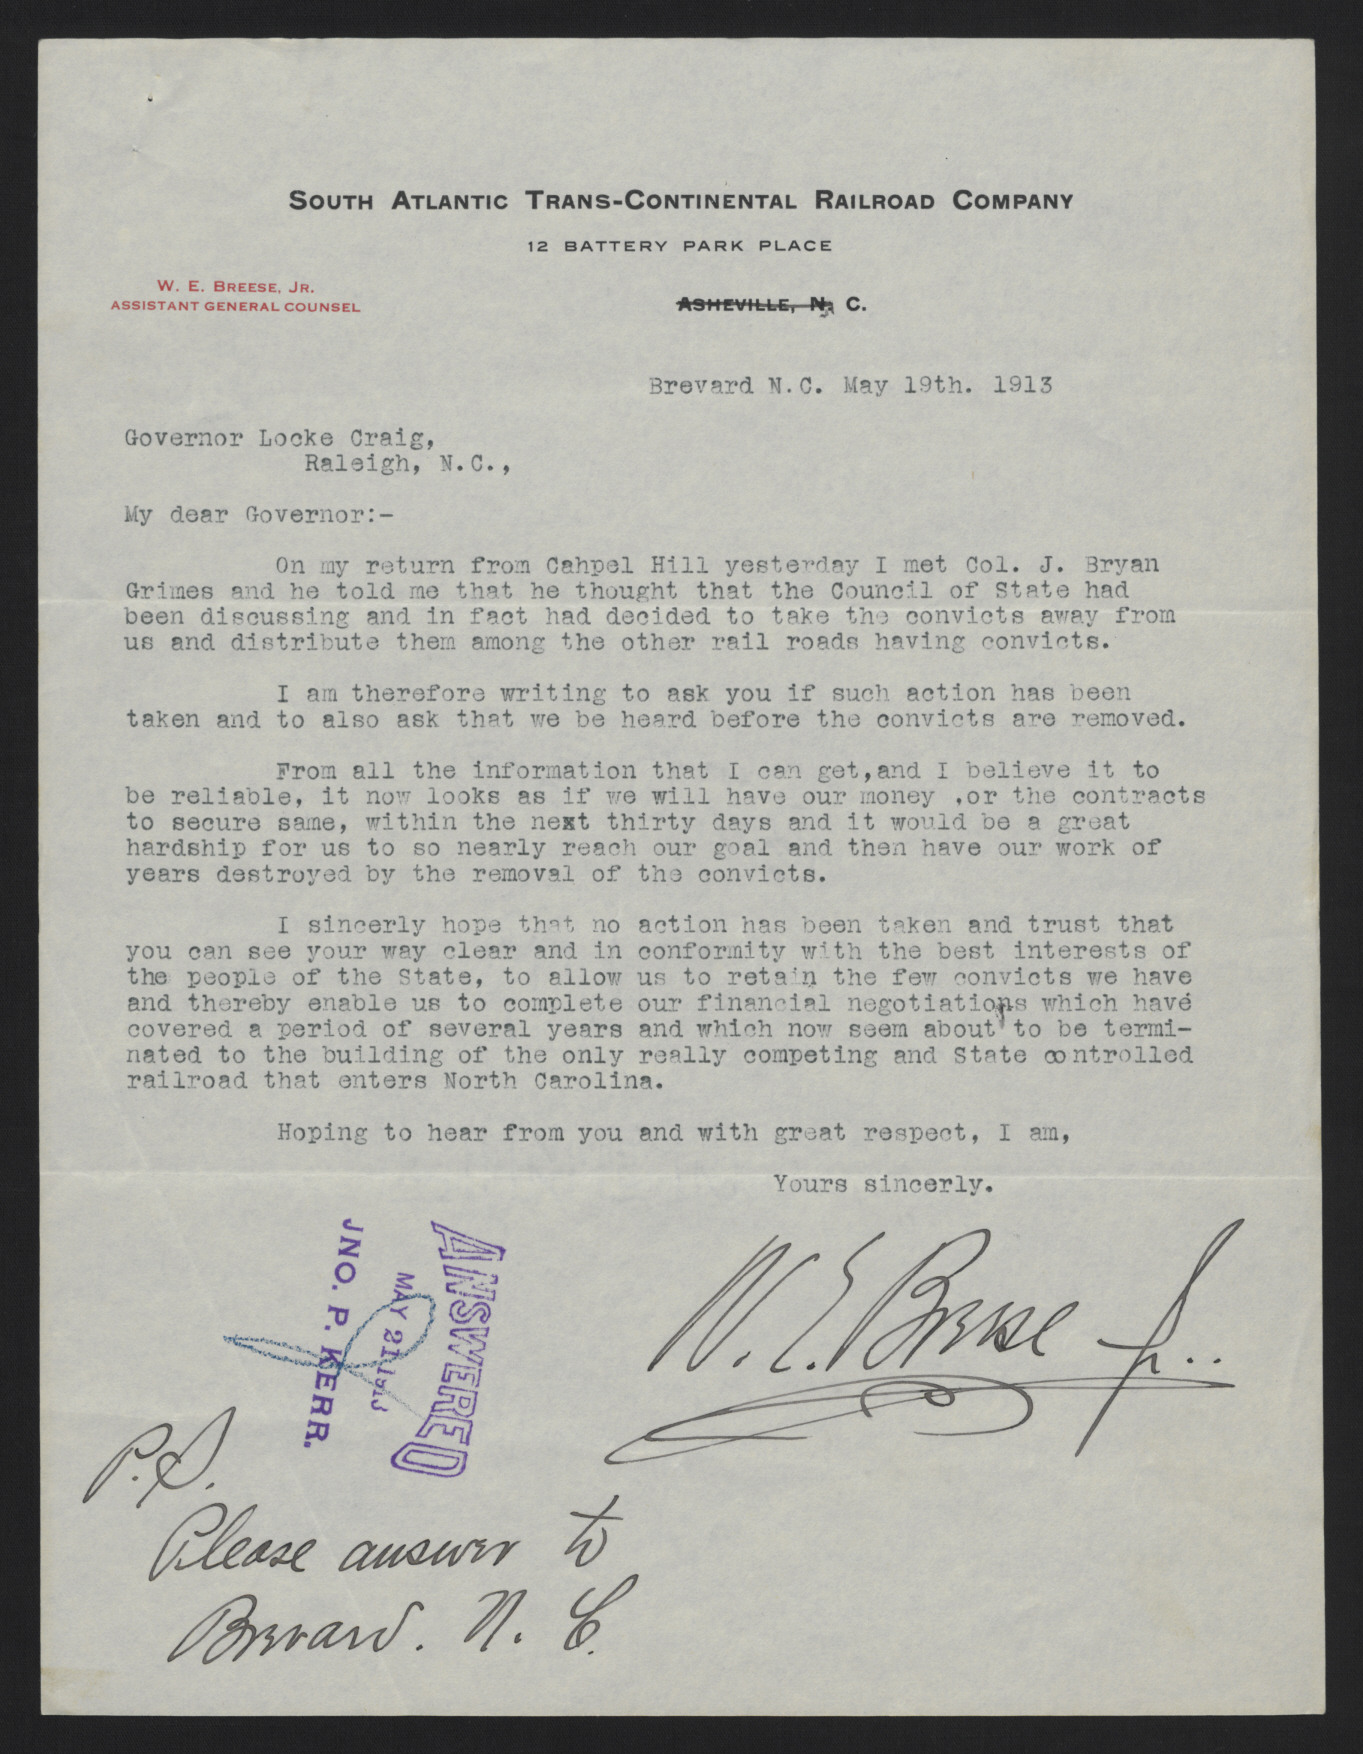 Letter from Breese to Craig, May 19, 1913